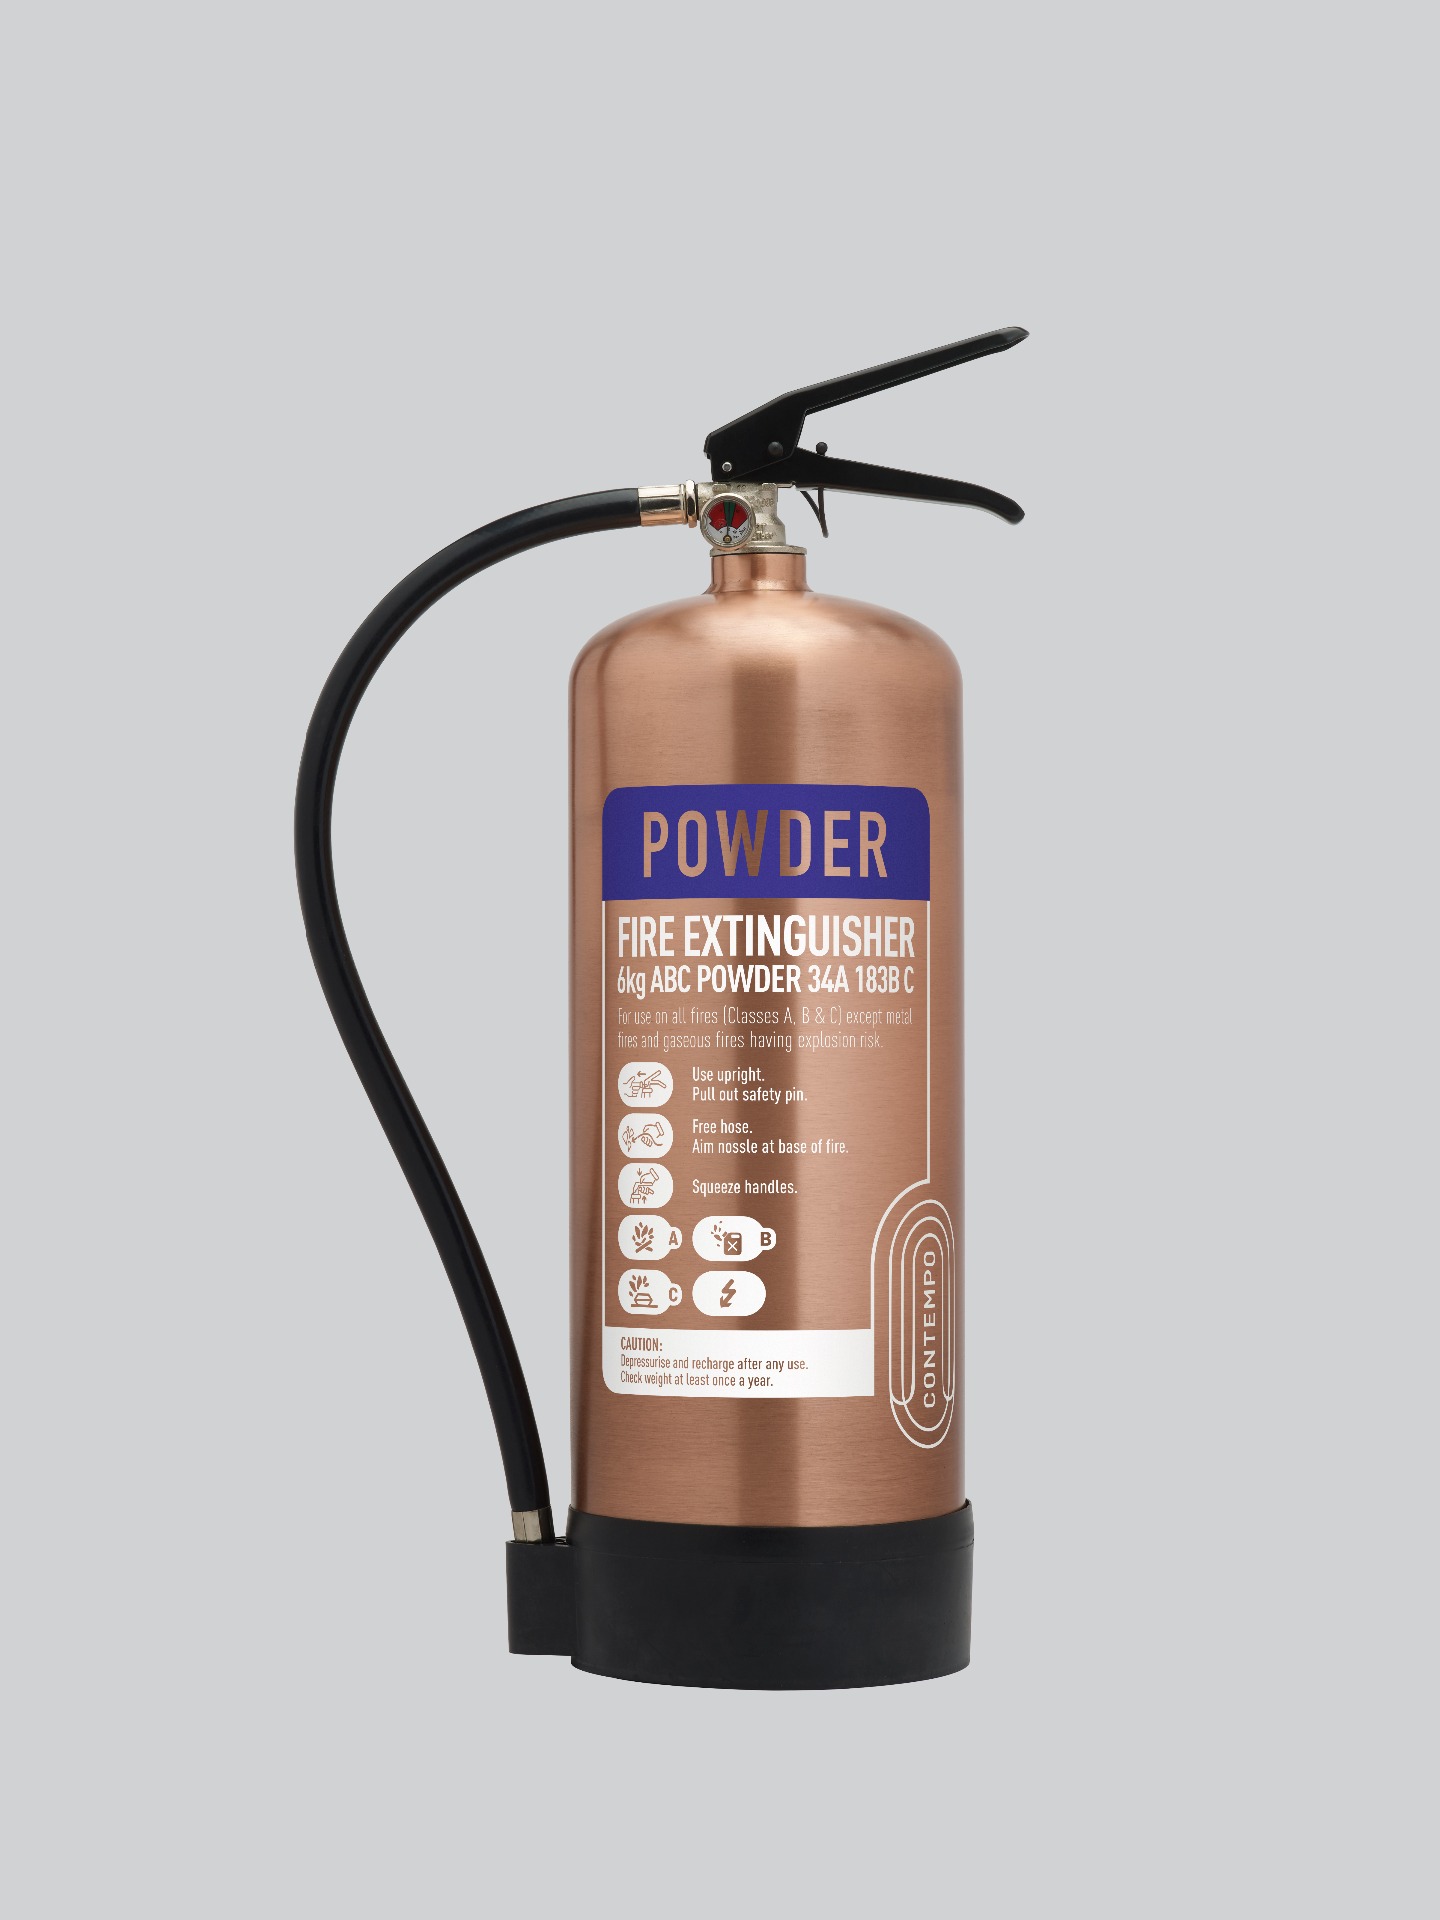 Midland Fire - First Class Range - 9 Kg ABC Dry Powder with a polished copper finish